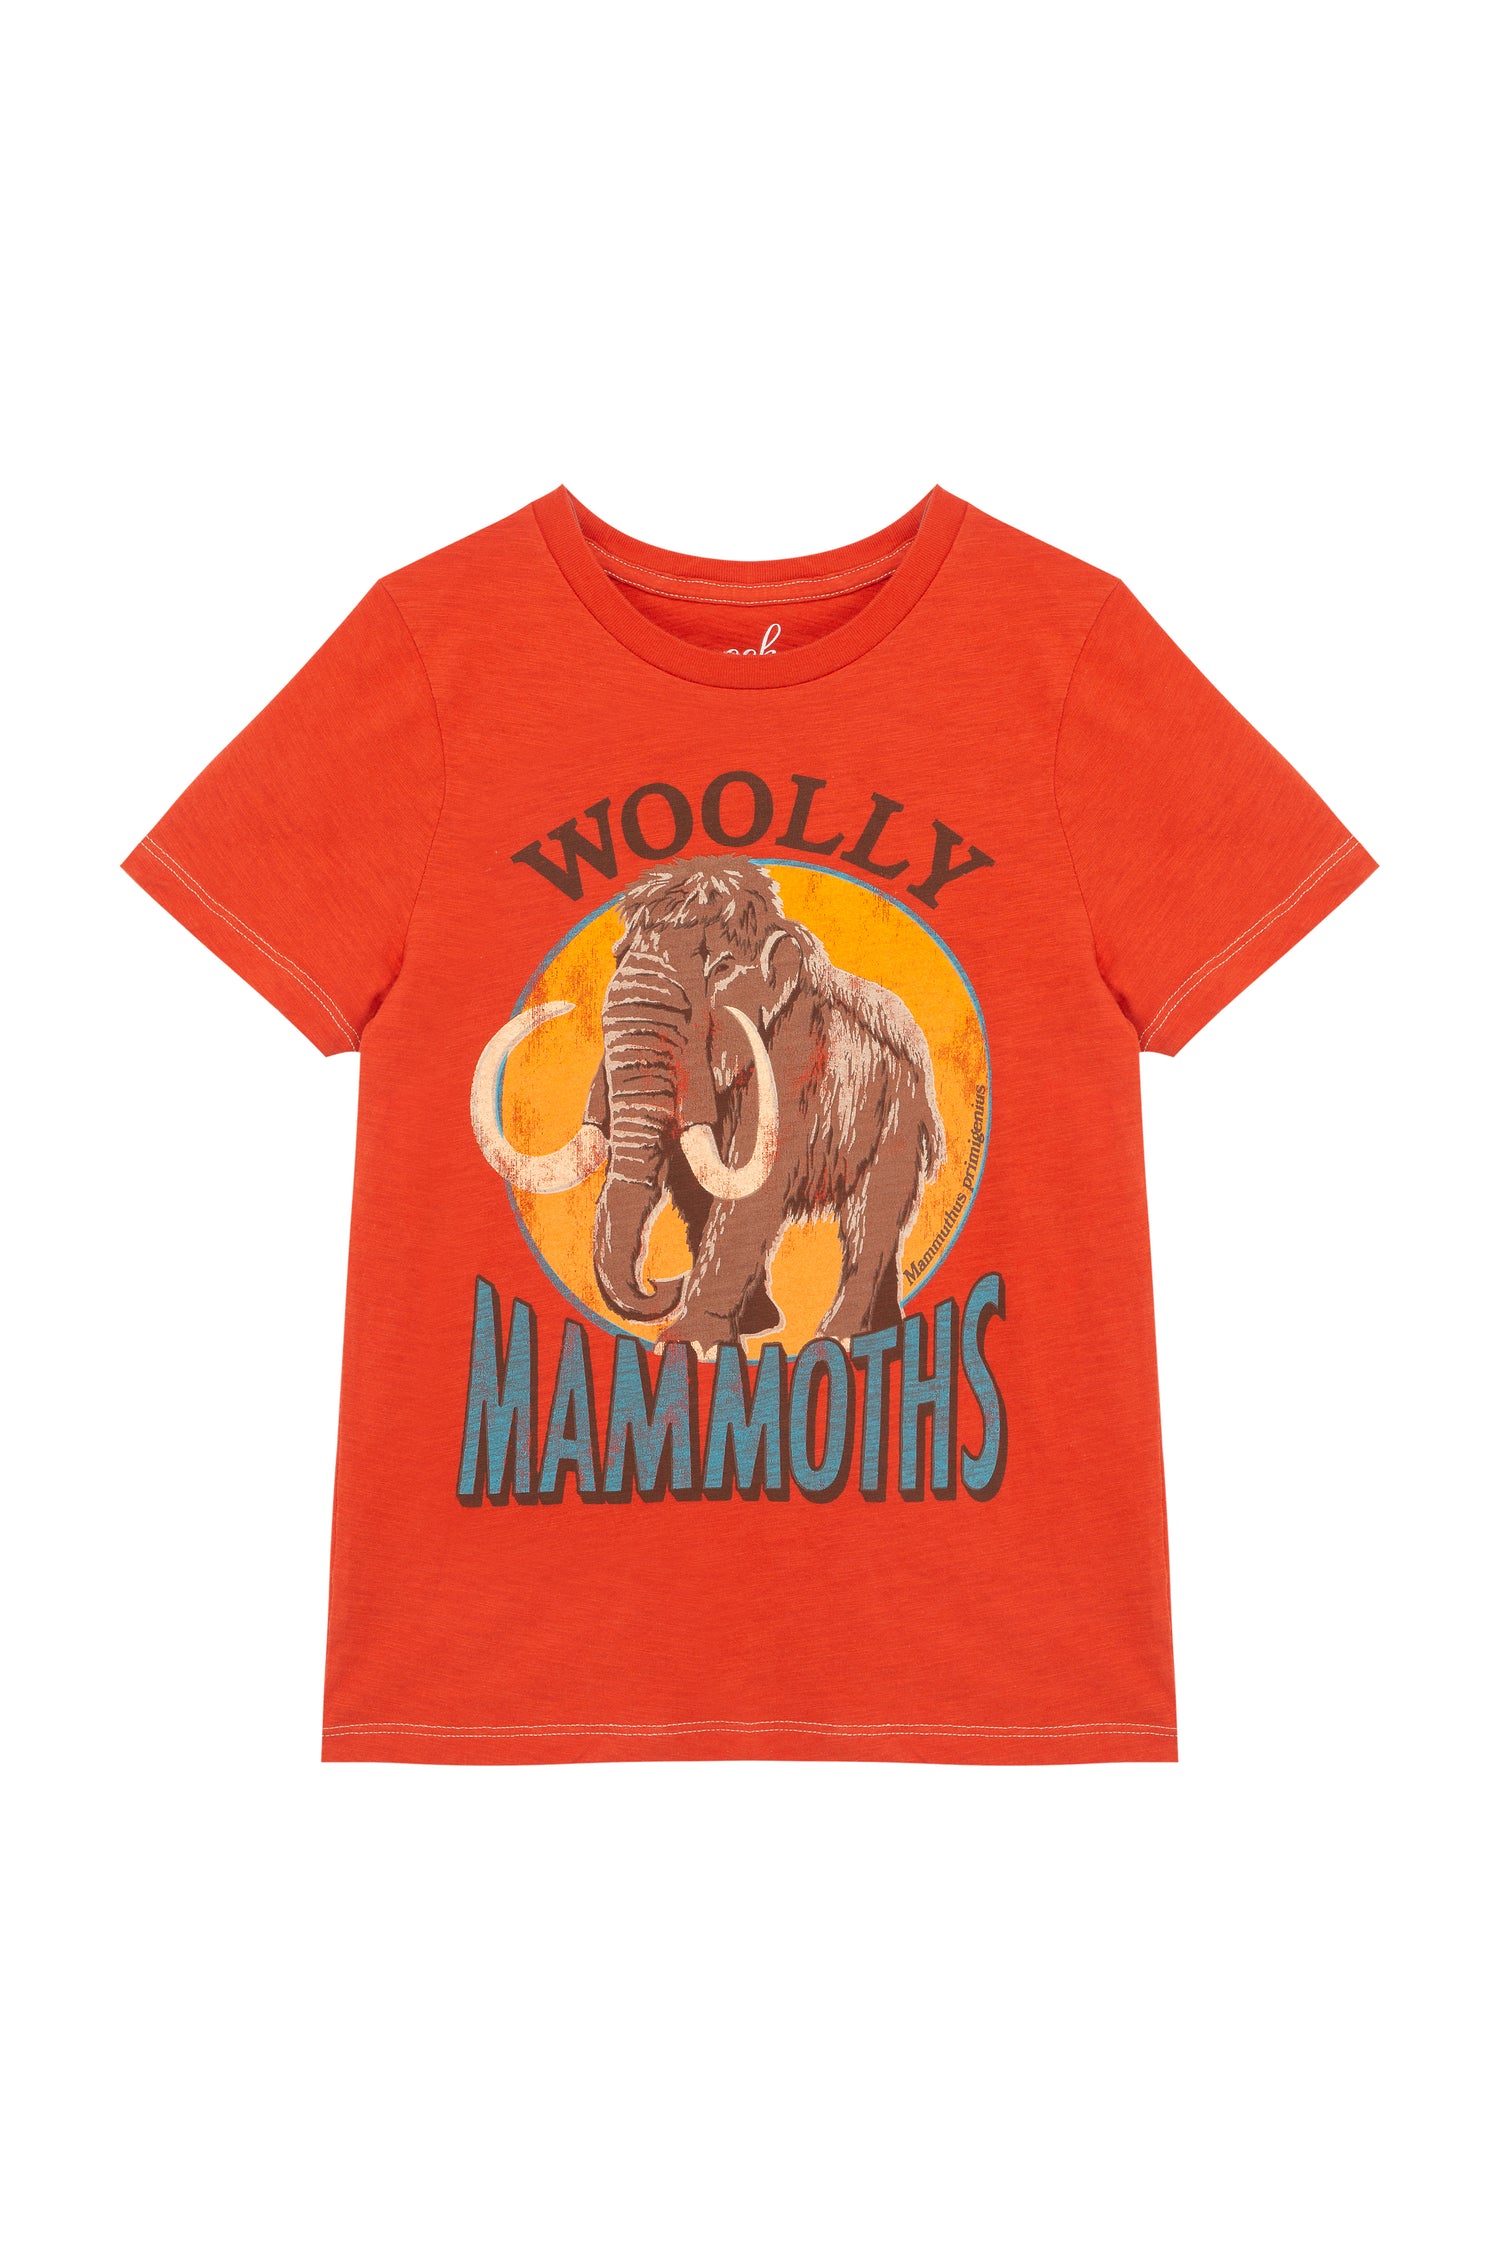 Red t-shirt with illustration of a woolly mammoth and text 'Wooly Mammoth'